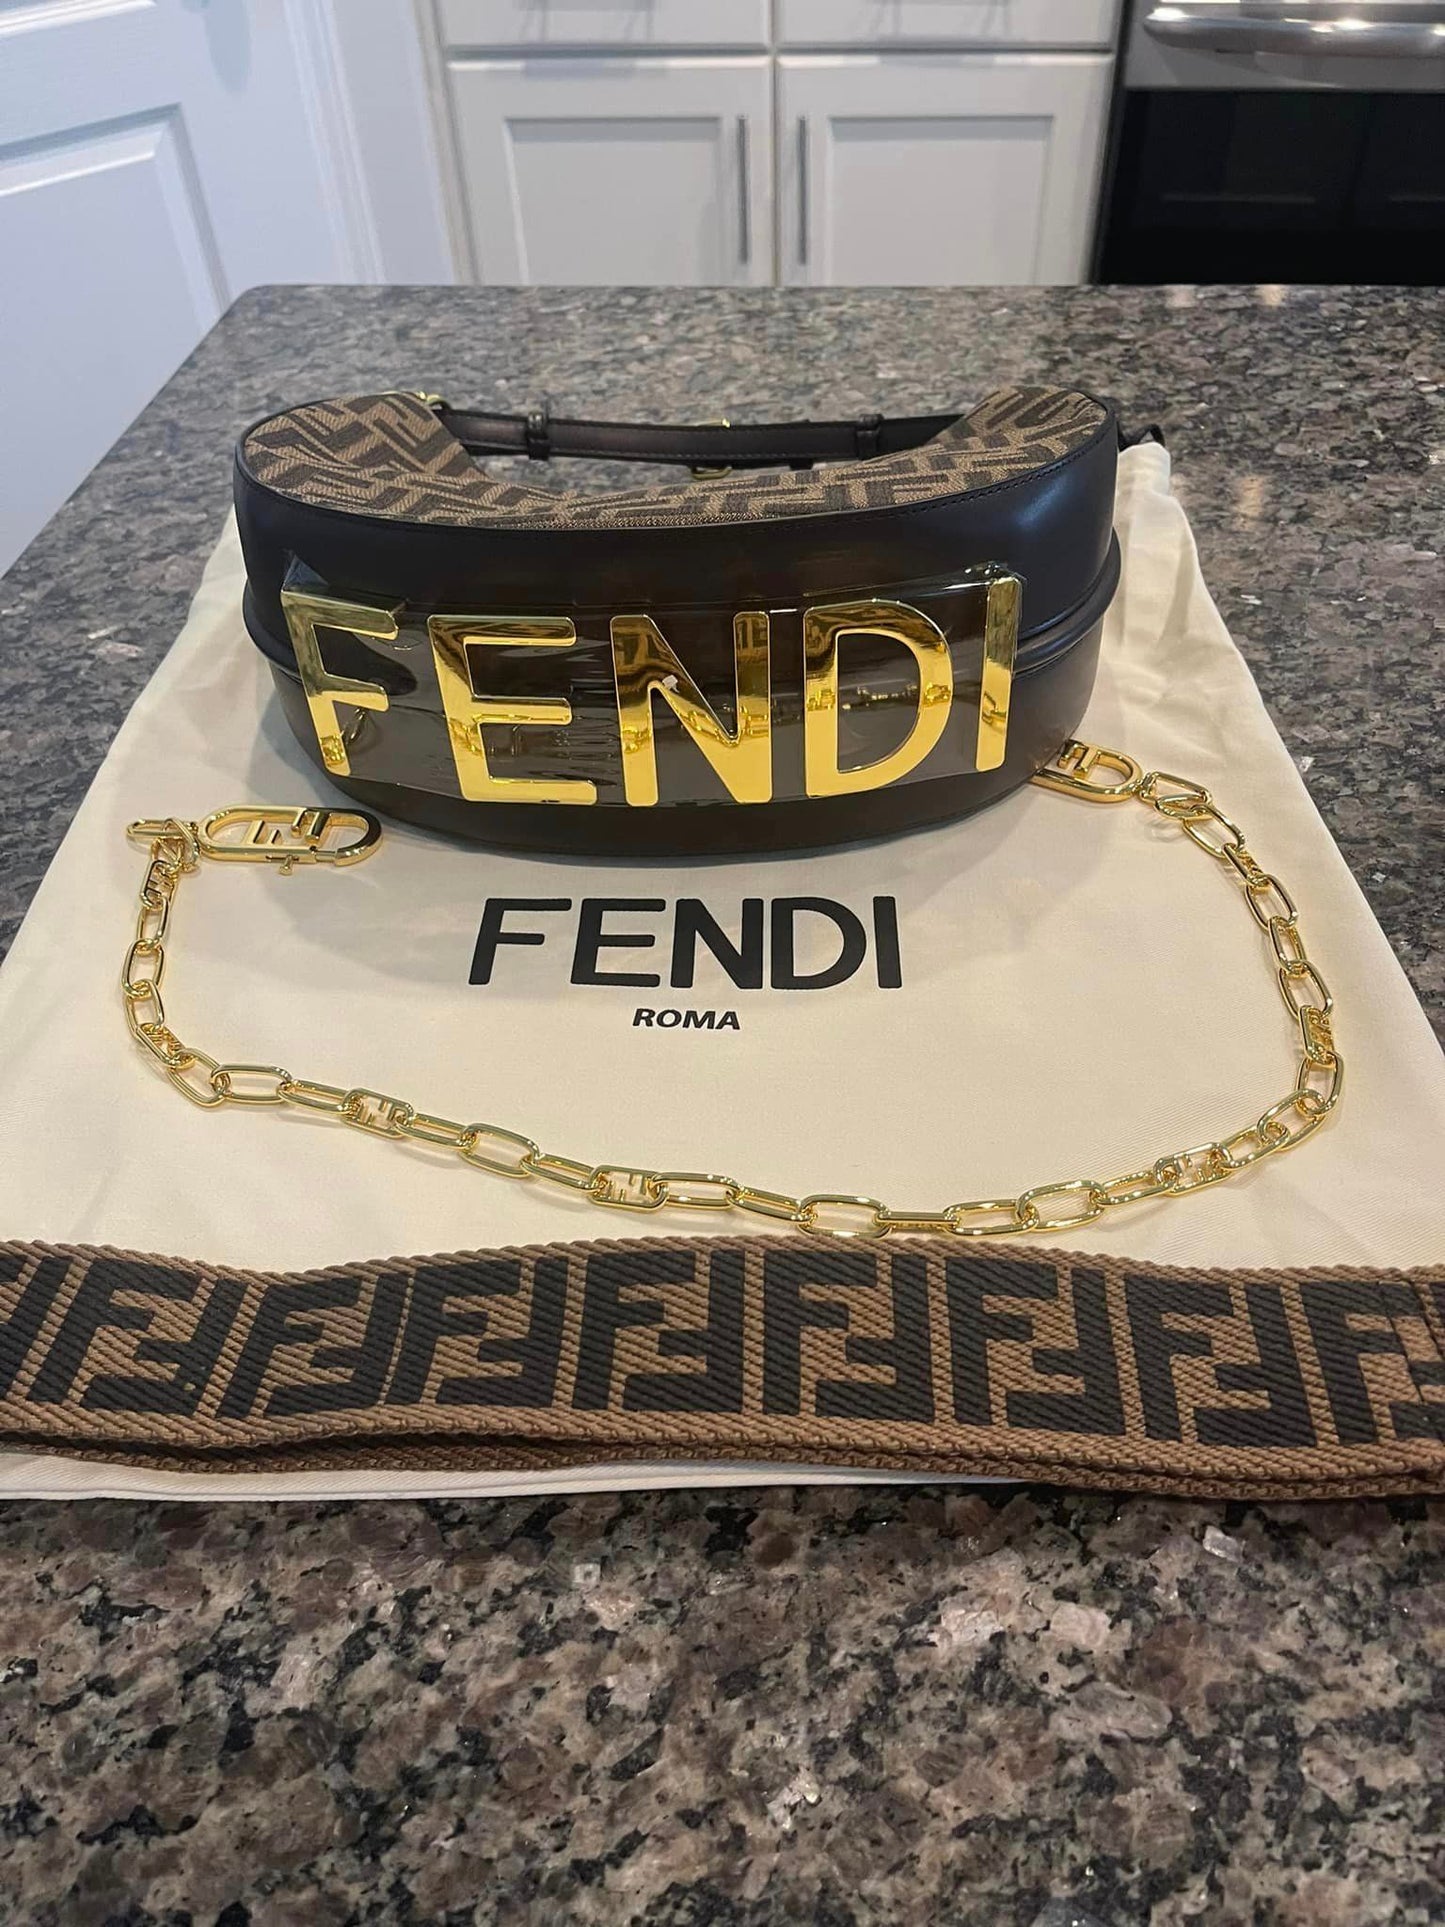 A Review of  Fendi Fendigraphy